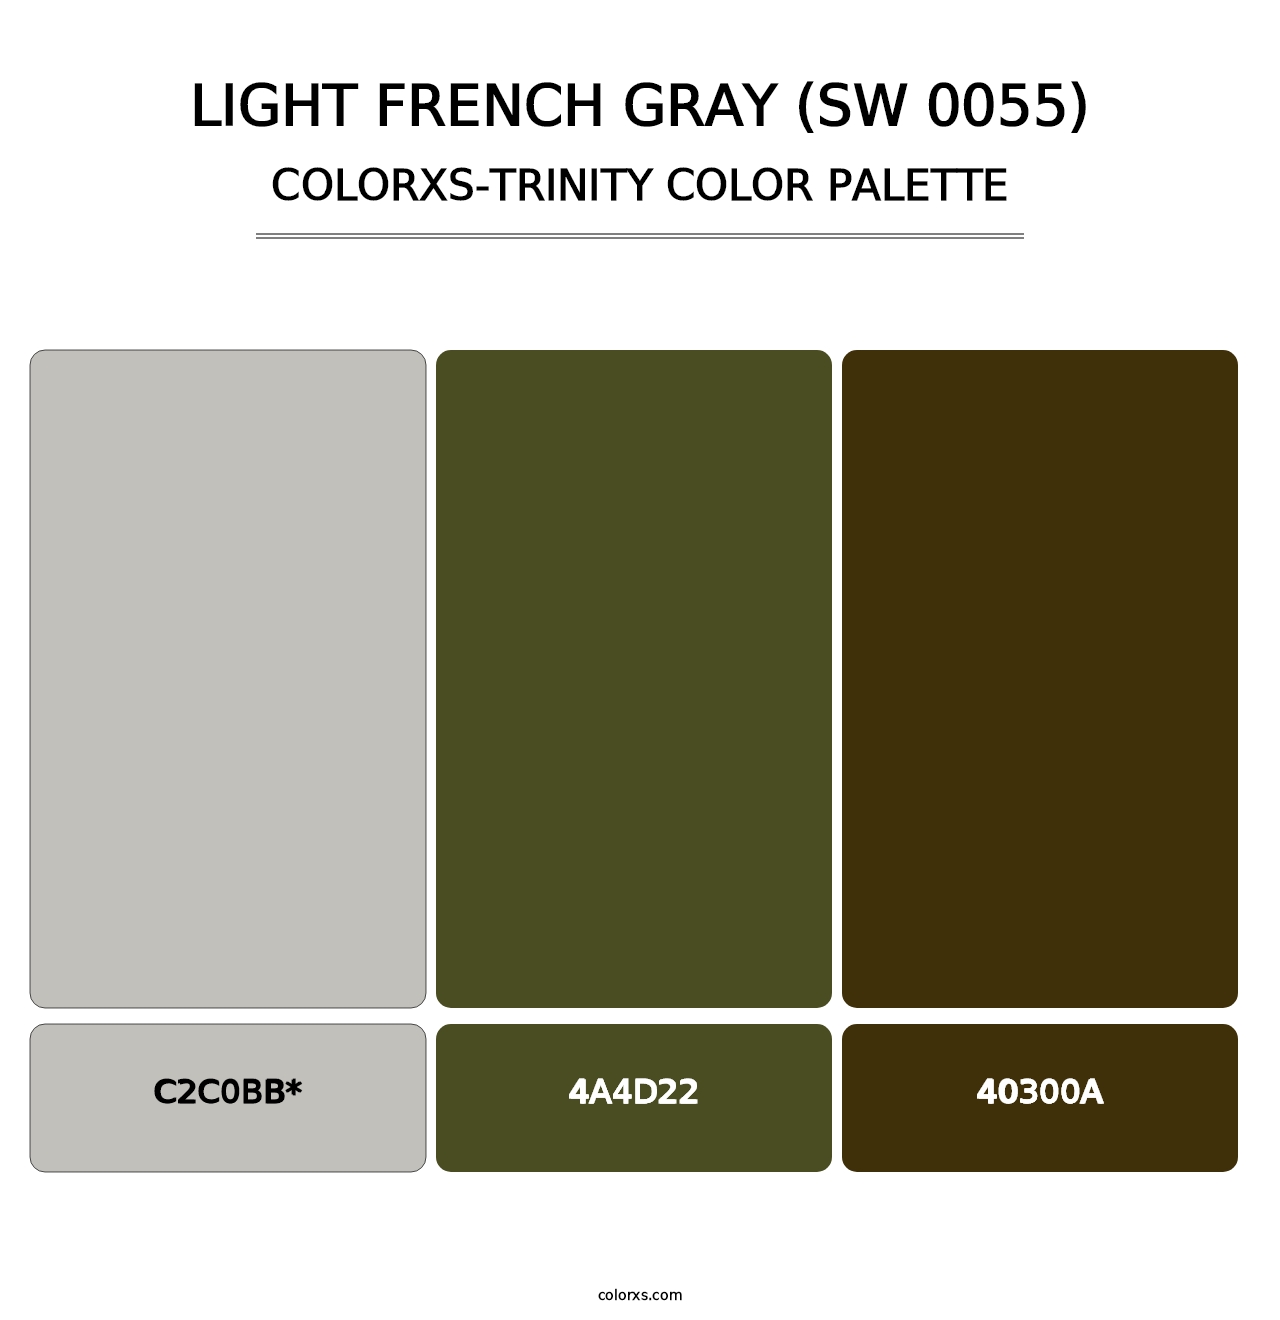 Light French Gray (SW 0055) - Colorxs Trinity Palette